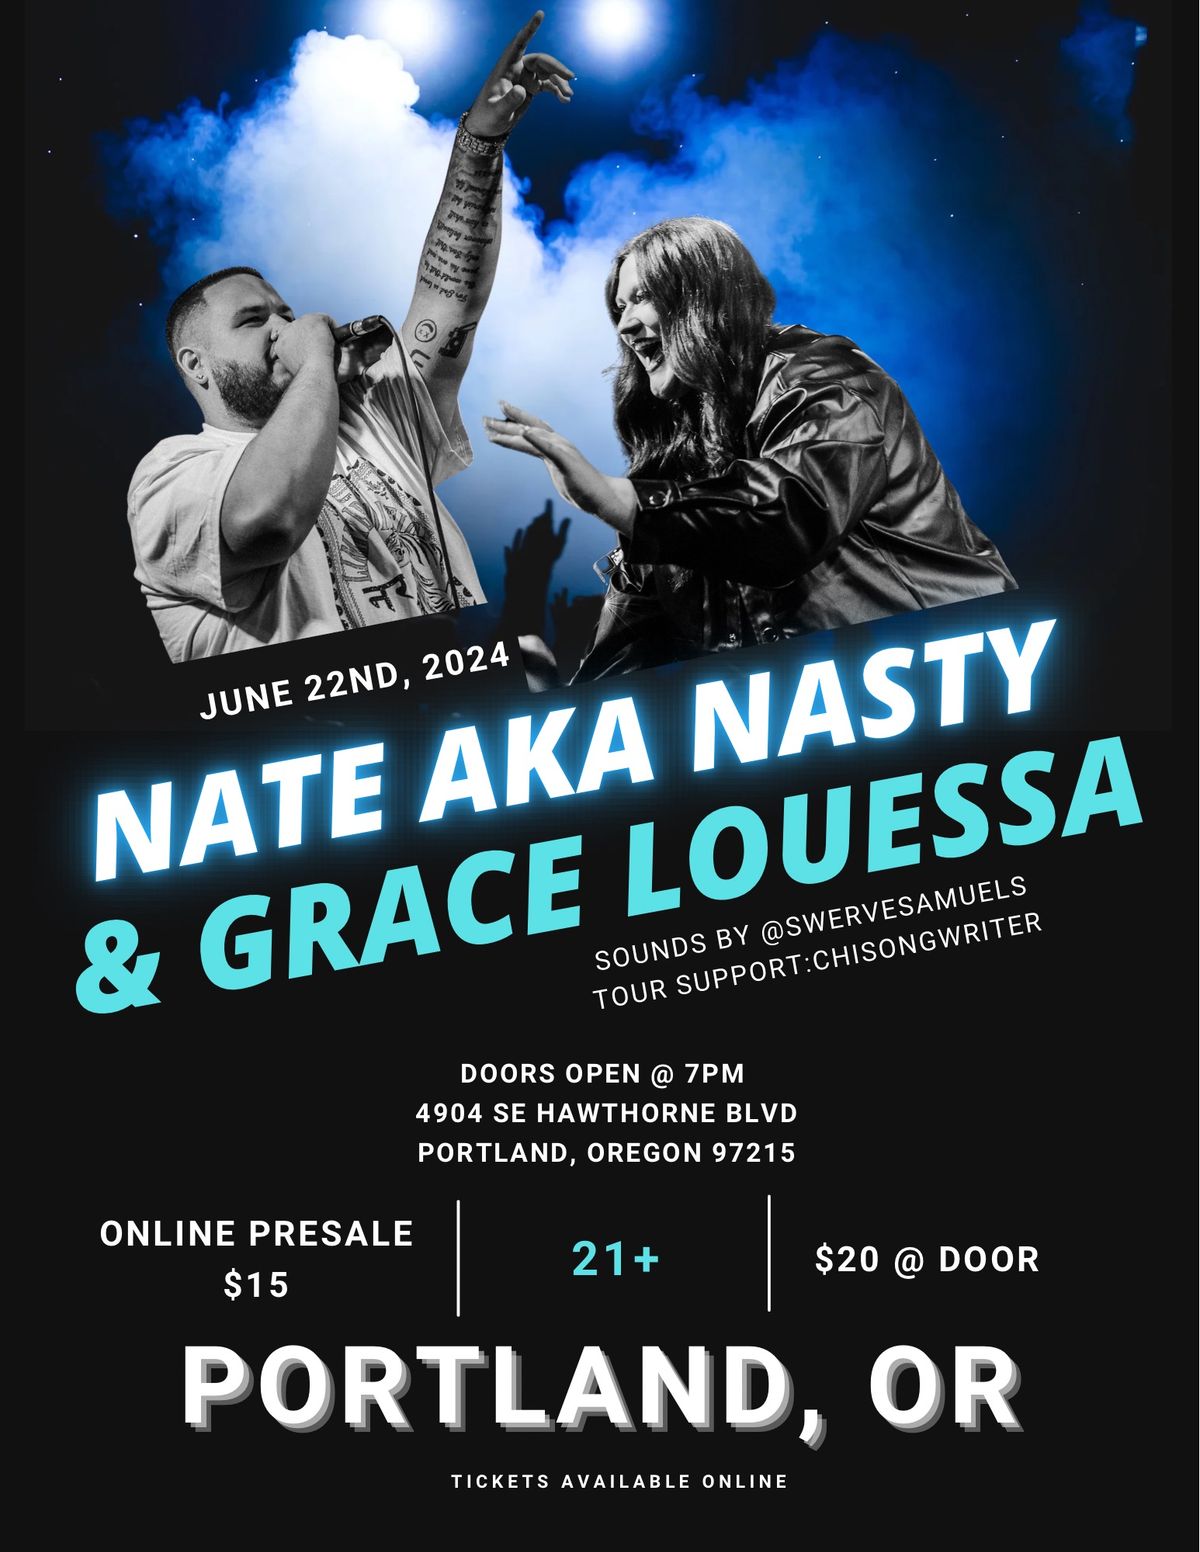 Nate AKA Nasty with Grace Louessa in Portland, OR 